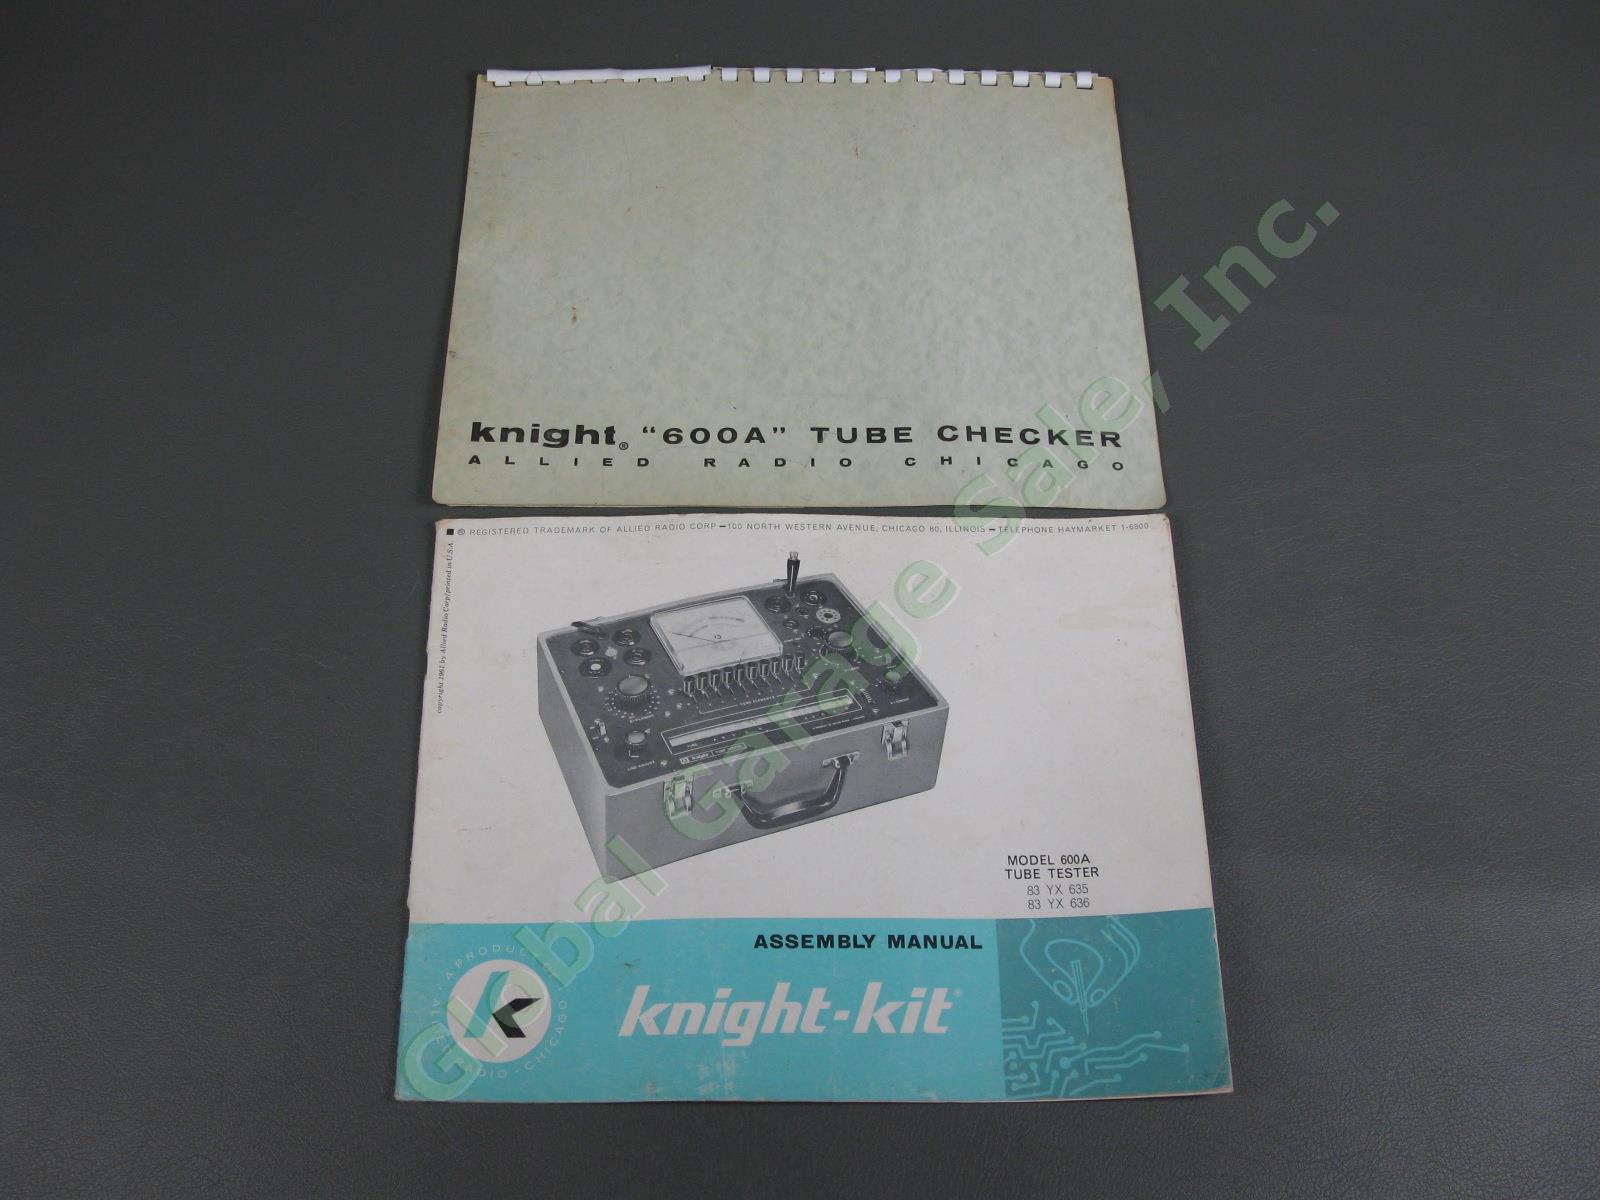 Vintage 1961 Knight-Kit Model 600A Tube Checker Industrial Tester Manual Working 3